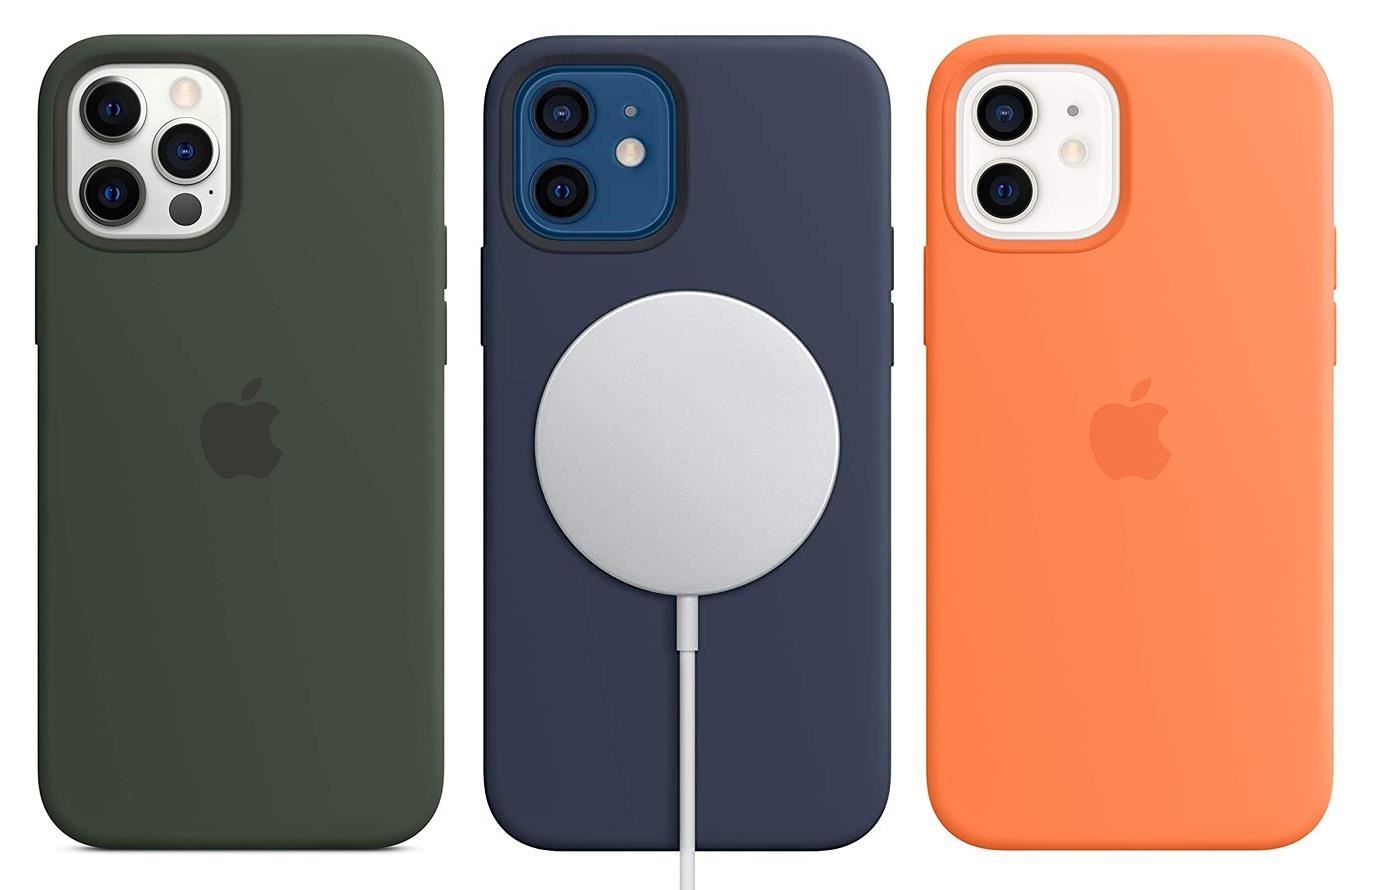 13 Protective Cases That'll Safeguard Your New iPhone 12 or 12 Pro & Still Make It Look Cool